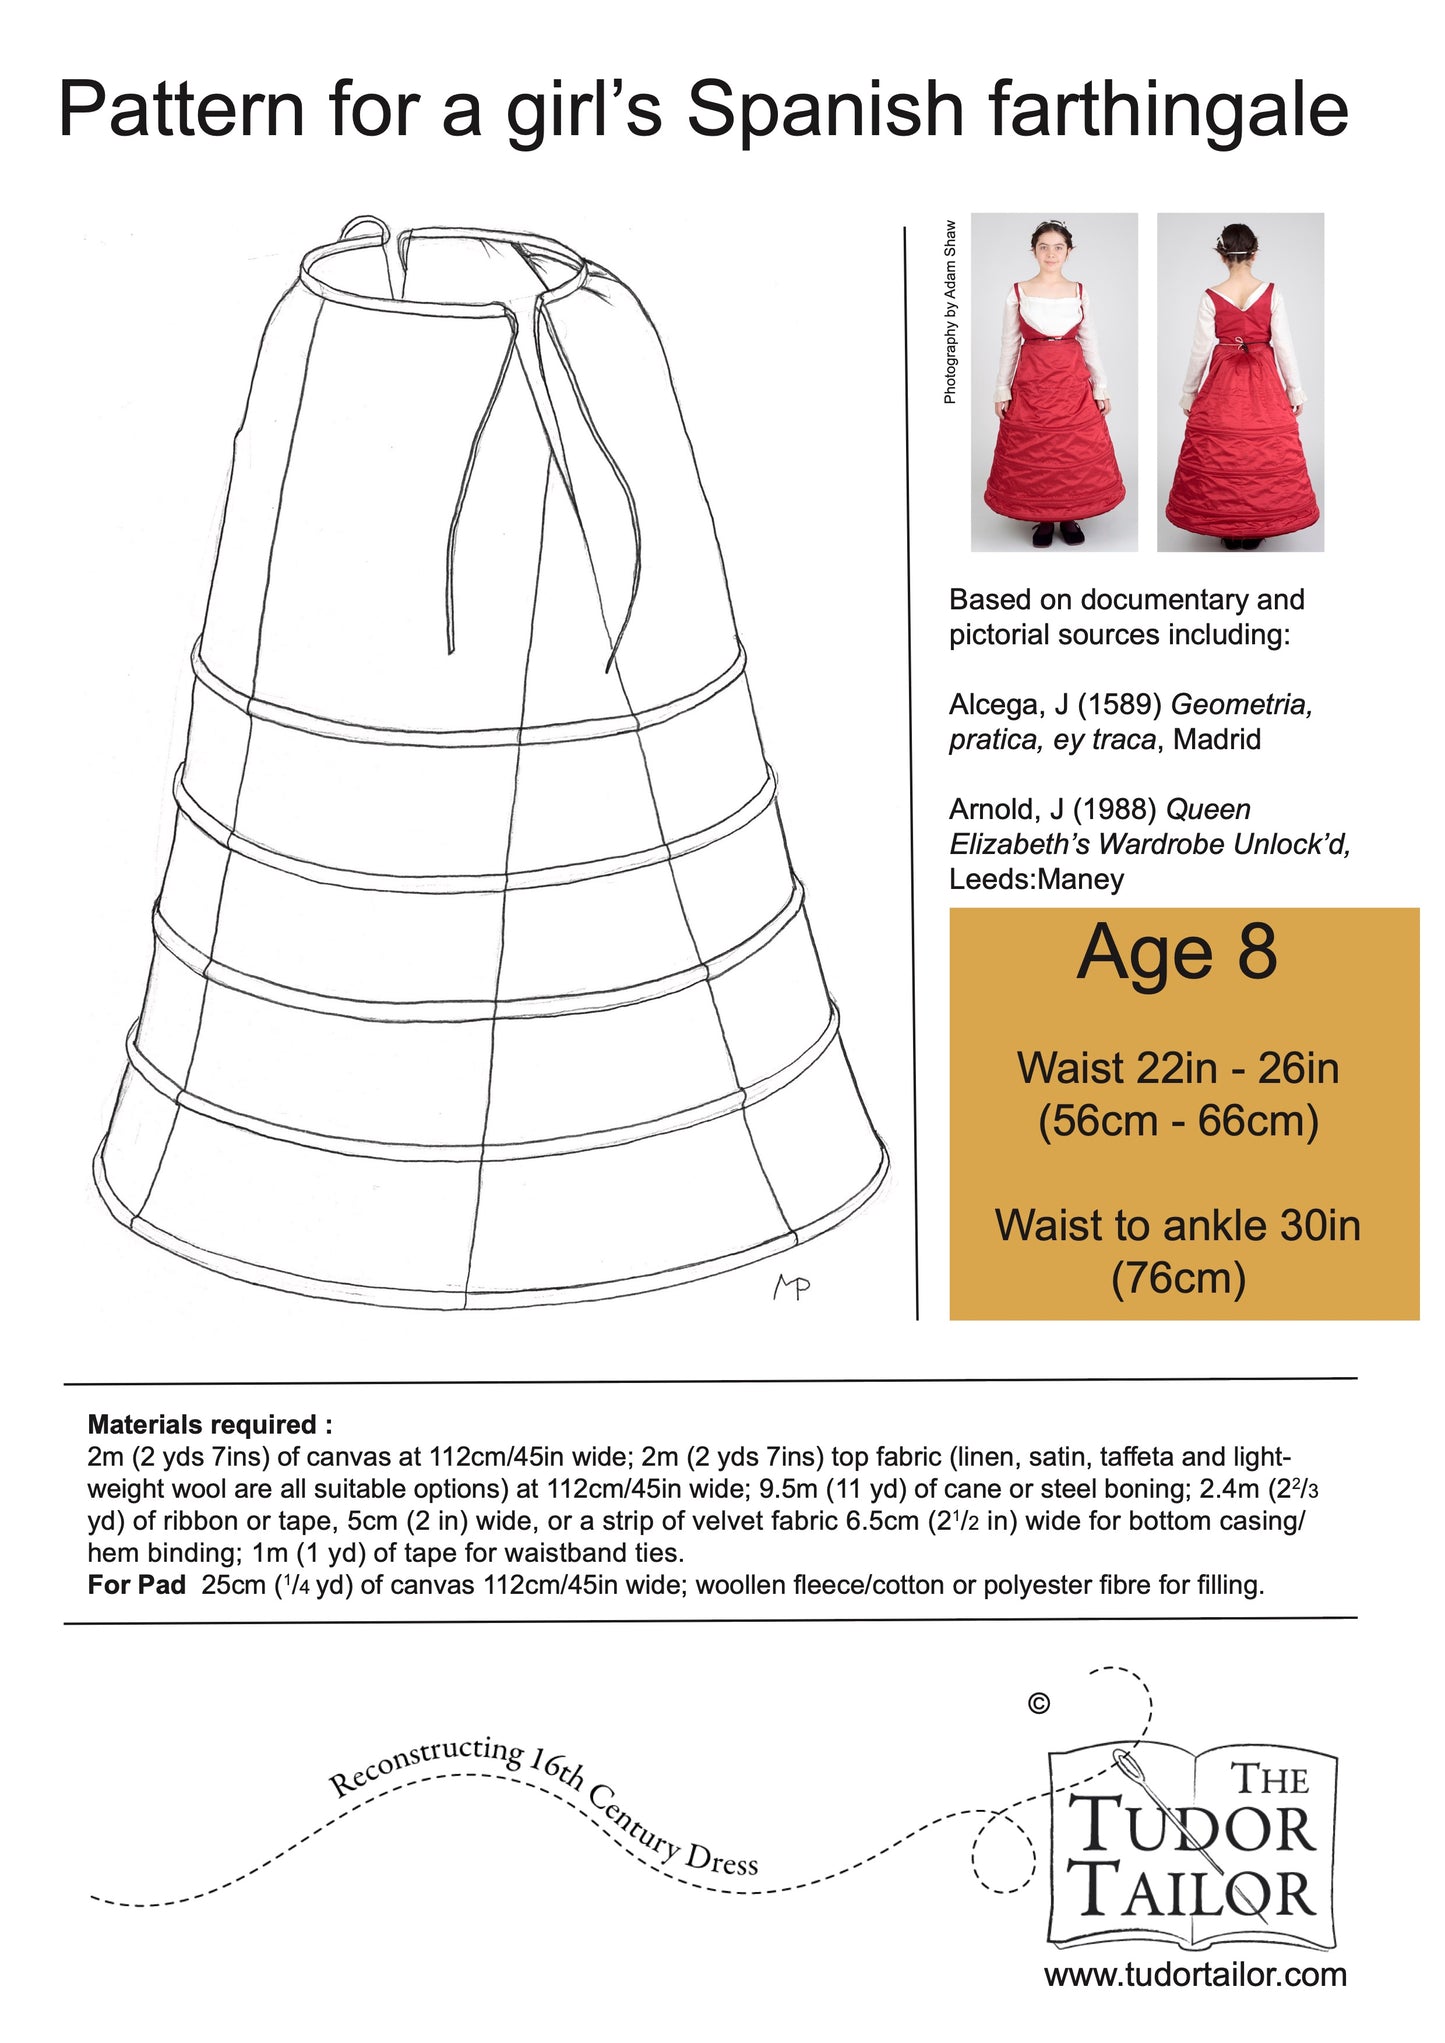 Pattern for Henrician girl's Spanish Farthingale for a child age 8 to 12